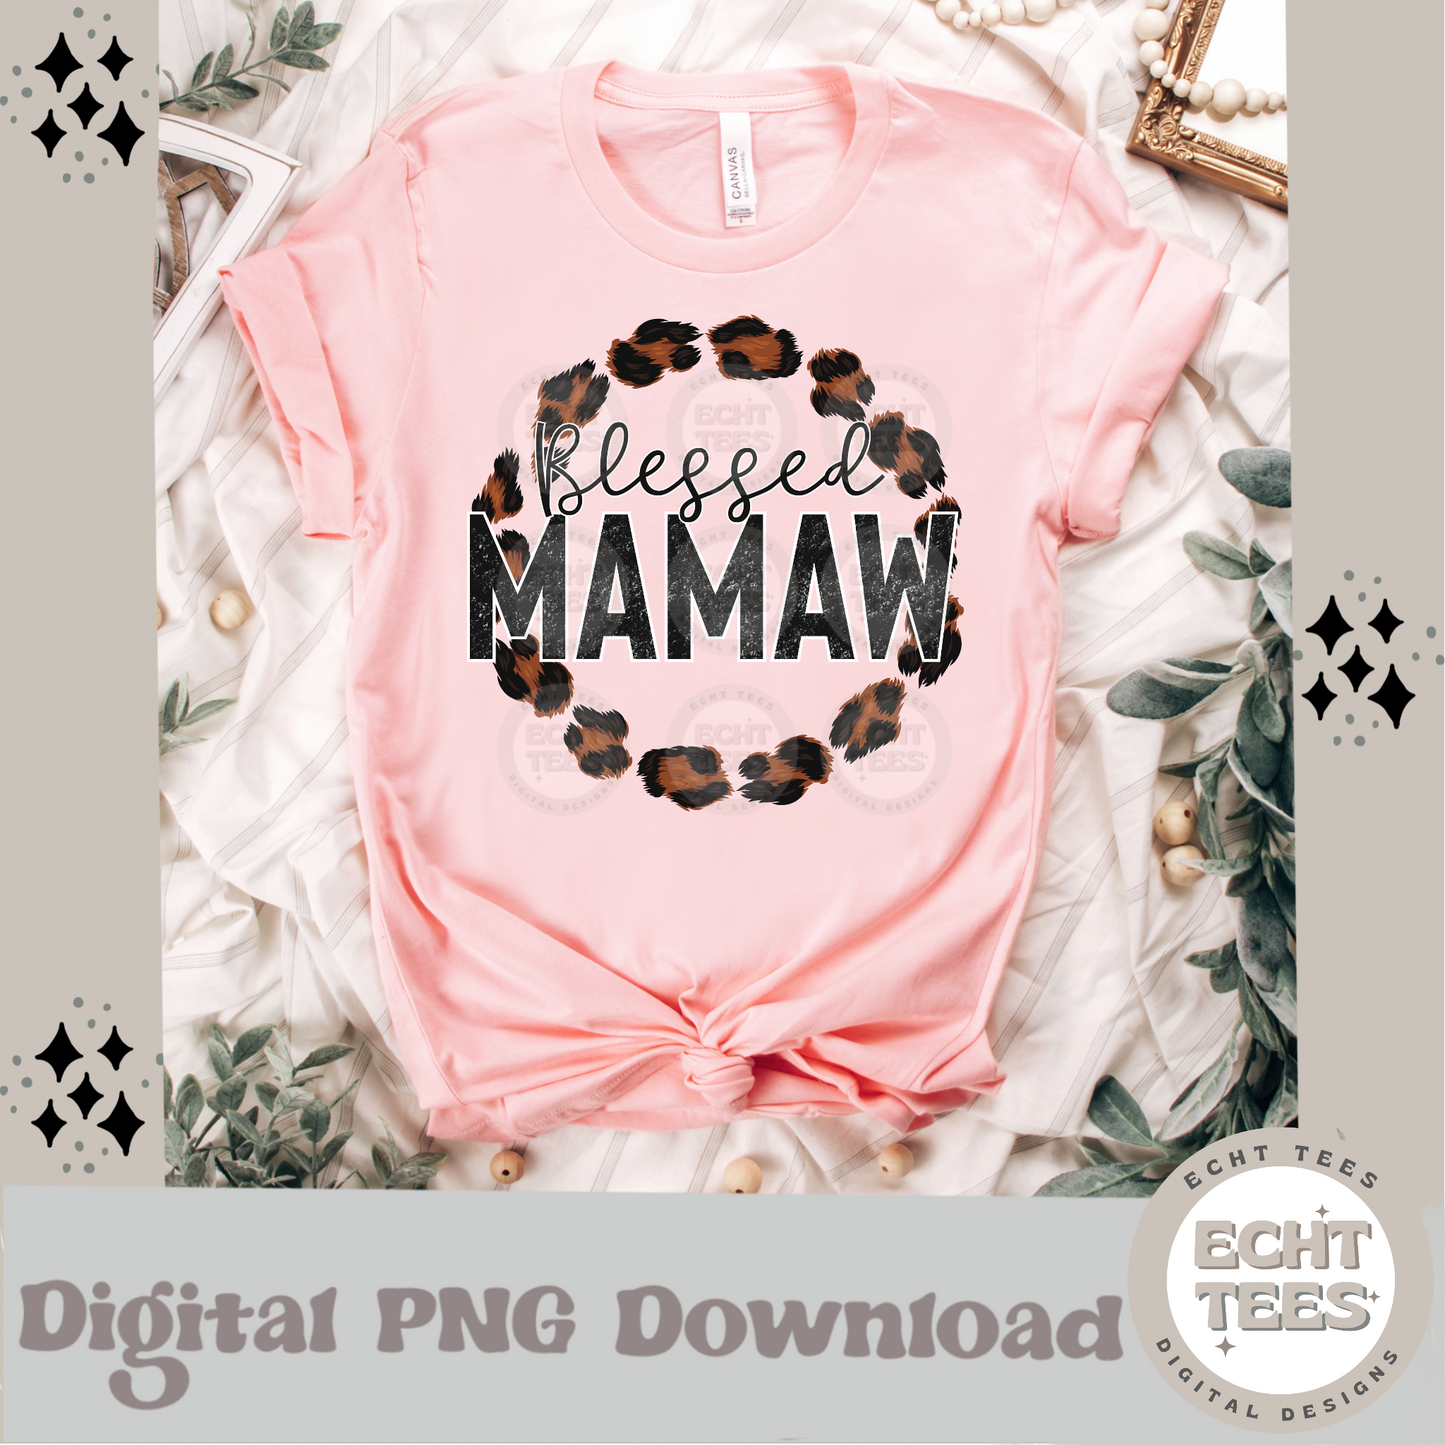 Blessed Mamaw PNG Digital Download